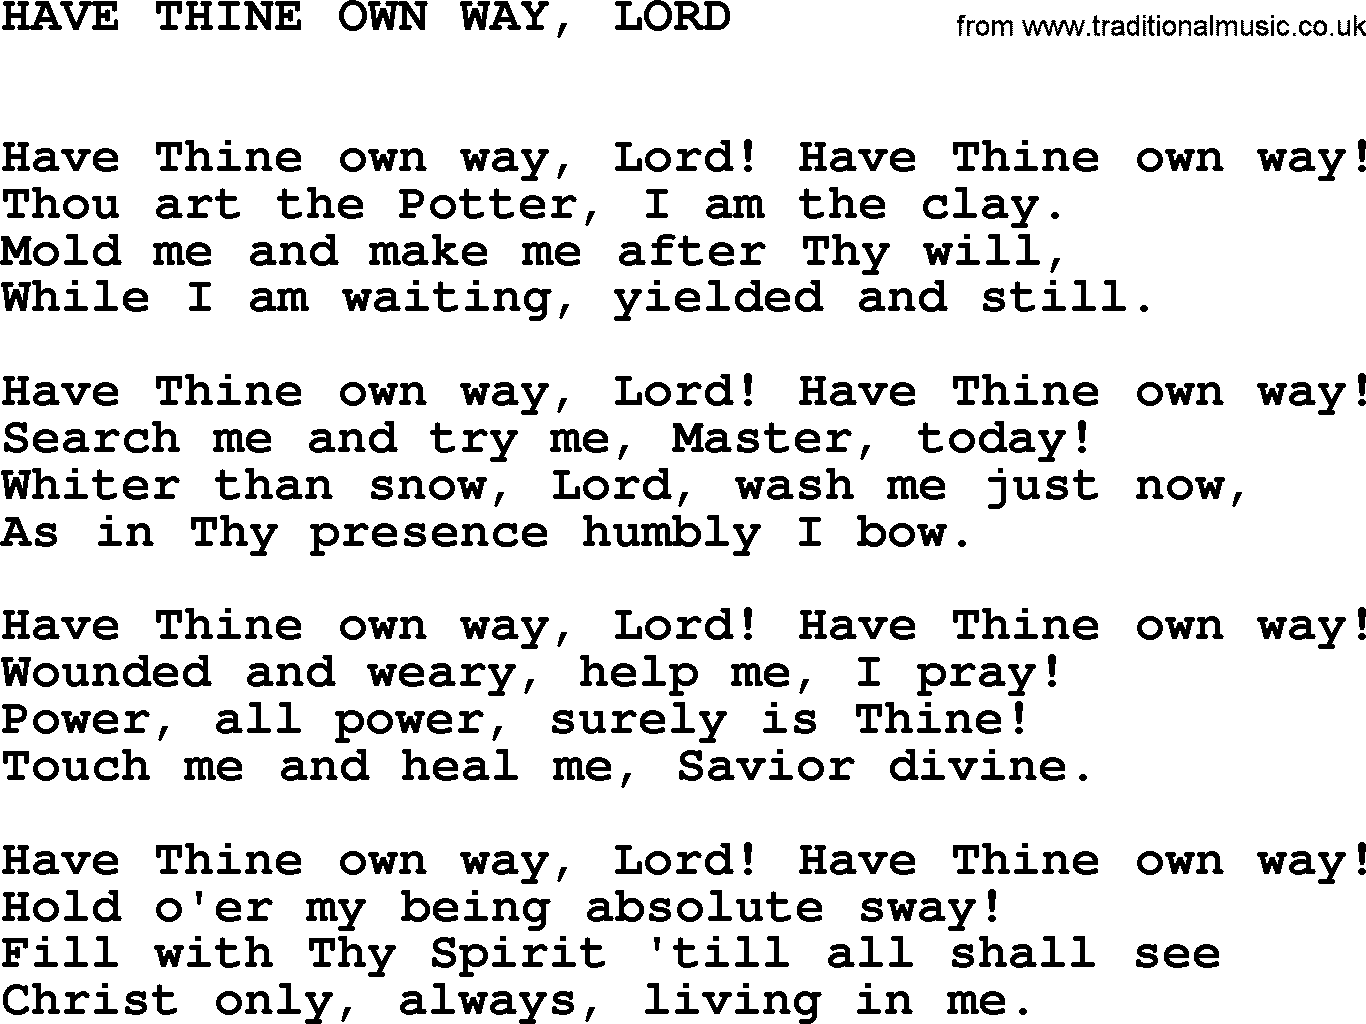 The Story Behind Have Thine Own Way, Lord